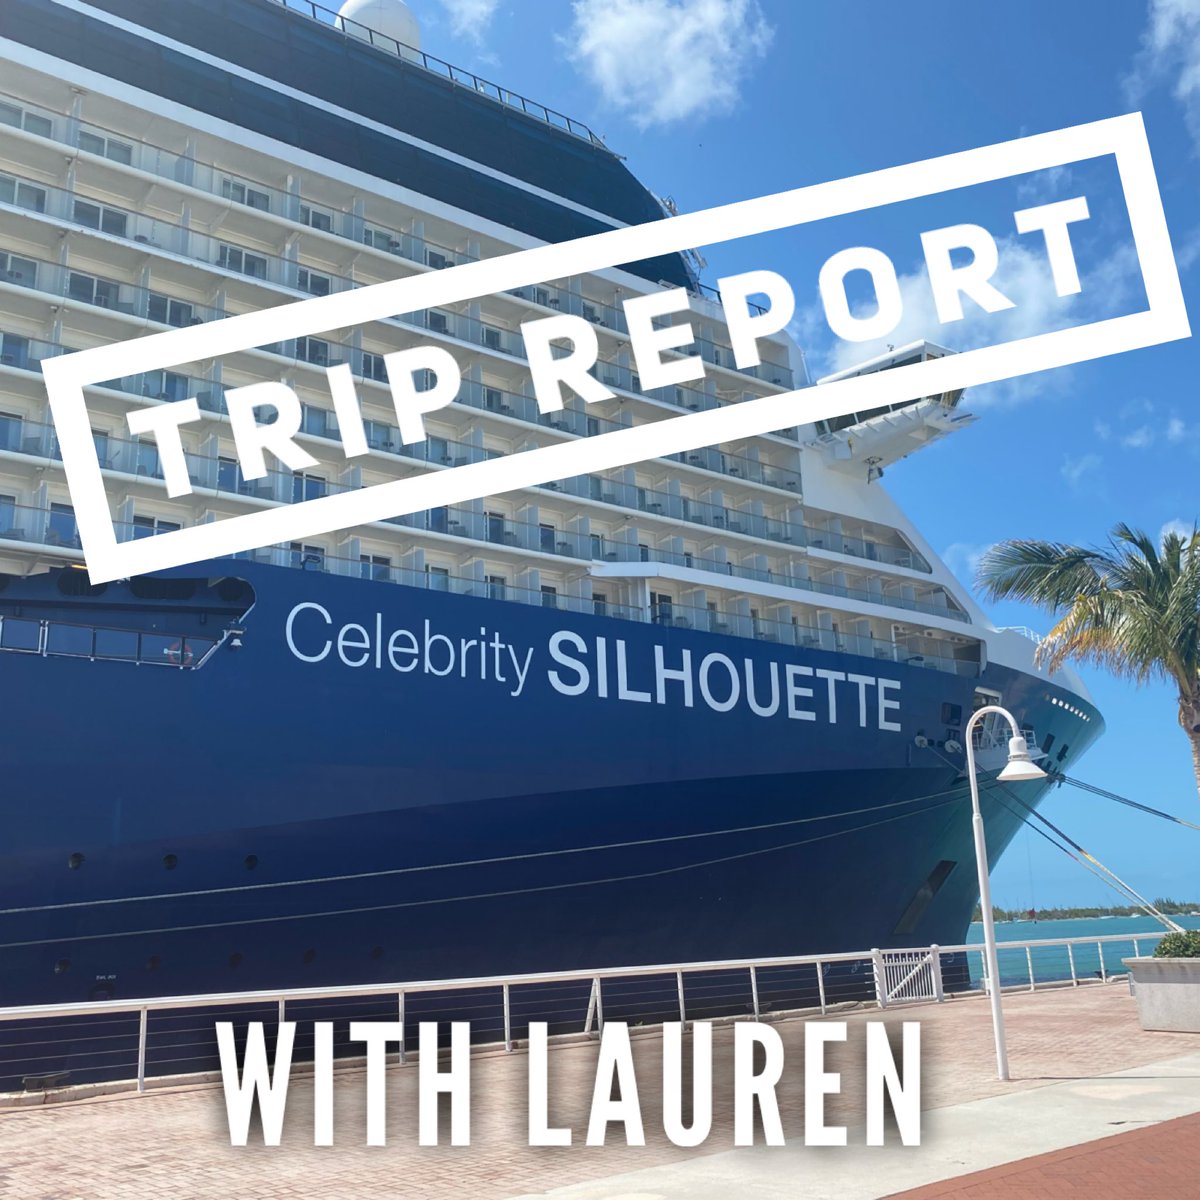 This week we sail on Celebrity with Lauren of Touring and Cruises. Make sure to hear what her opinion on this cruise line. 
podcasts.apple.com/us/podcast/rop…

#cruise #cruisenews #travel #ropedrop #cruisepodcast